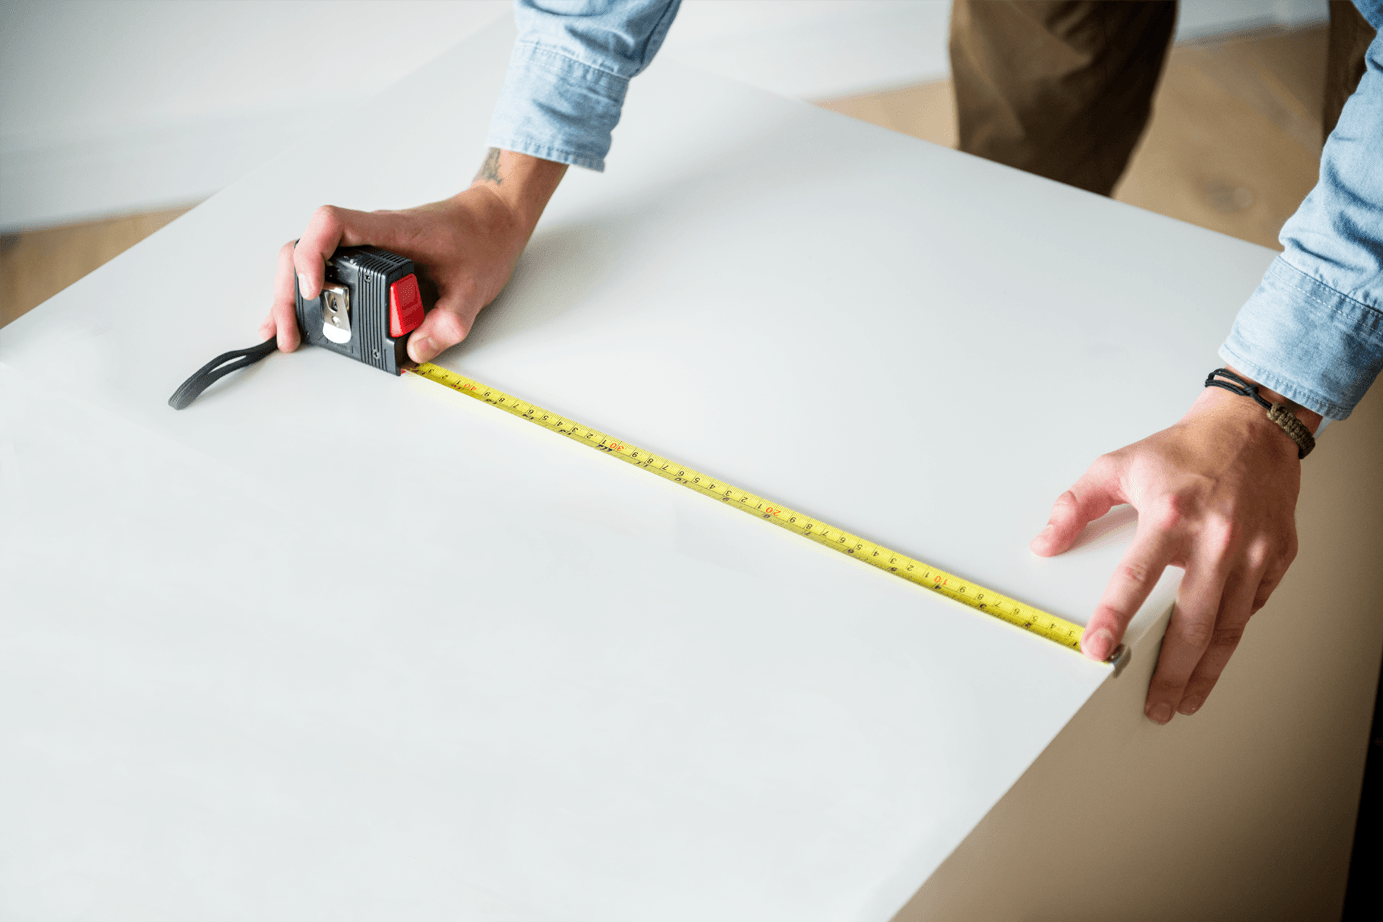 Man measuring with a tape measure